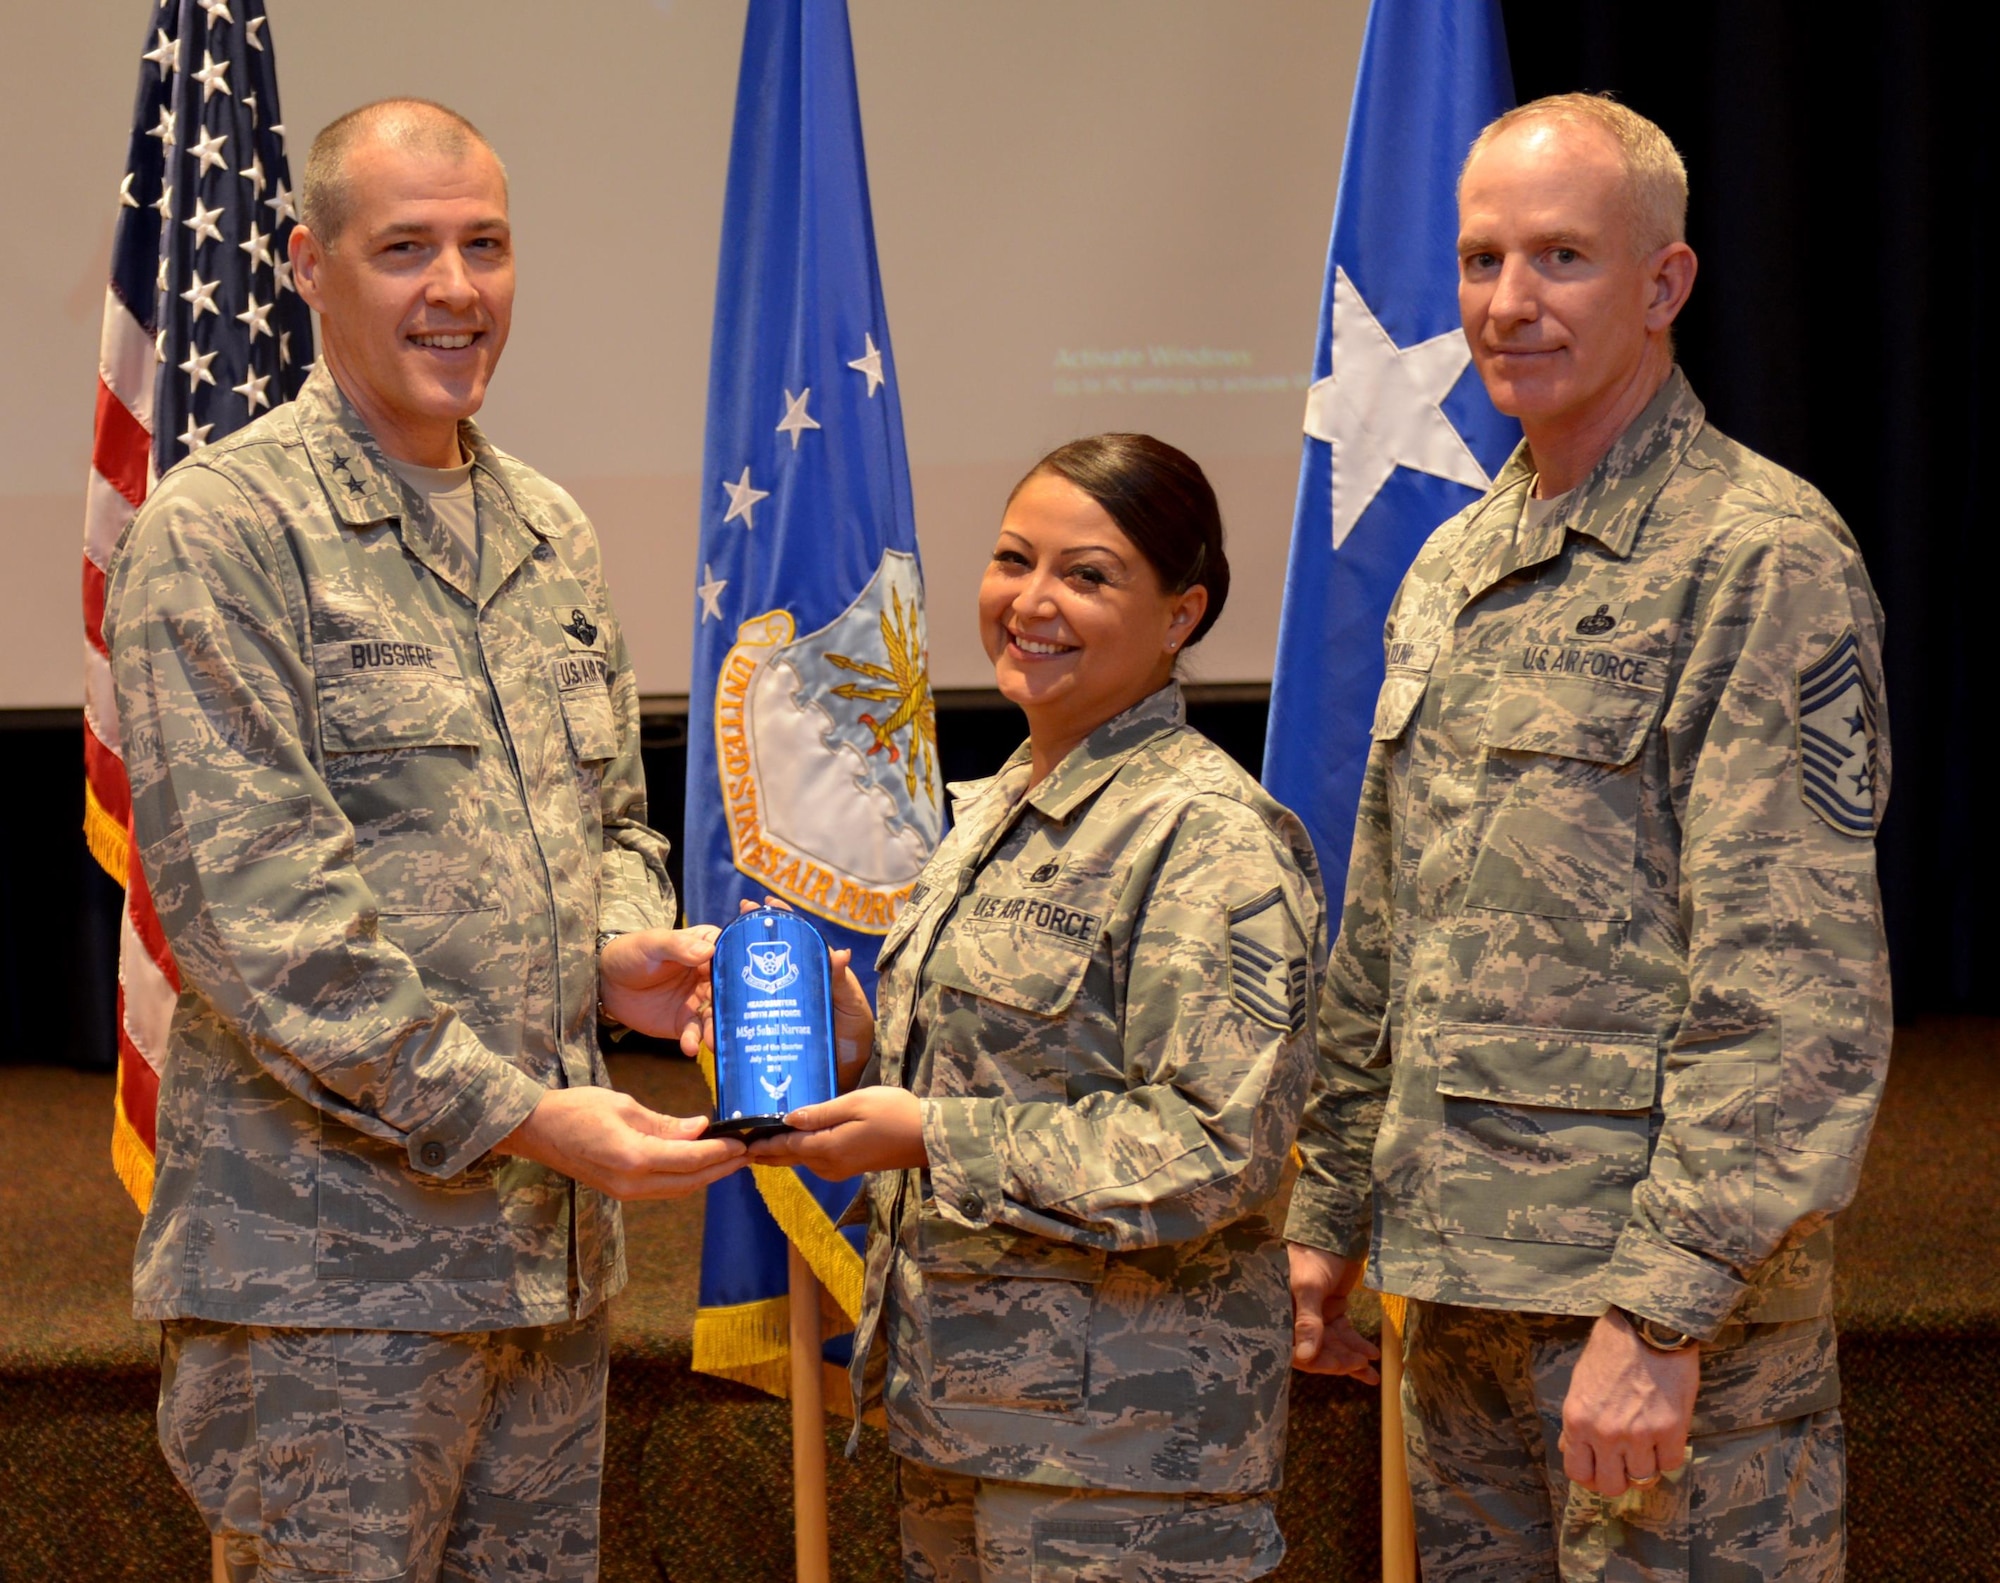 U.S. Air Force Maj. Gen. Thomas Bussiere, 8th Air Force commander, along with CMSgt. Alan Boling, 8th Air Force command chief, recognizes Quarterly Award winner Master Sgt. Suhail Narvaez at Barksdale Air Force Base, La., Nov. 17, 2016. (U.S. Air Force photo/Senior Airman Curtis Beach)